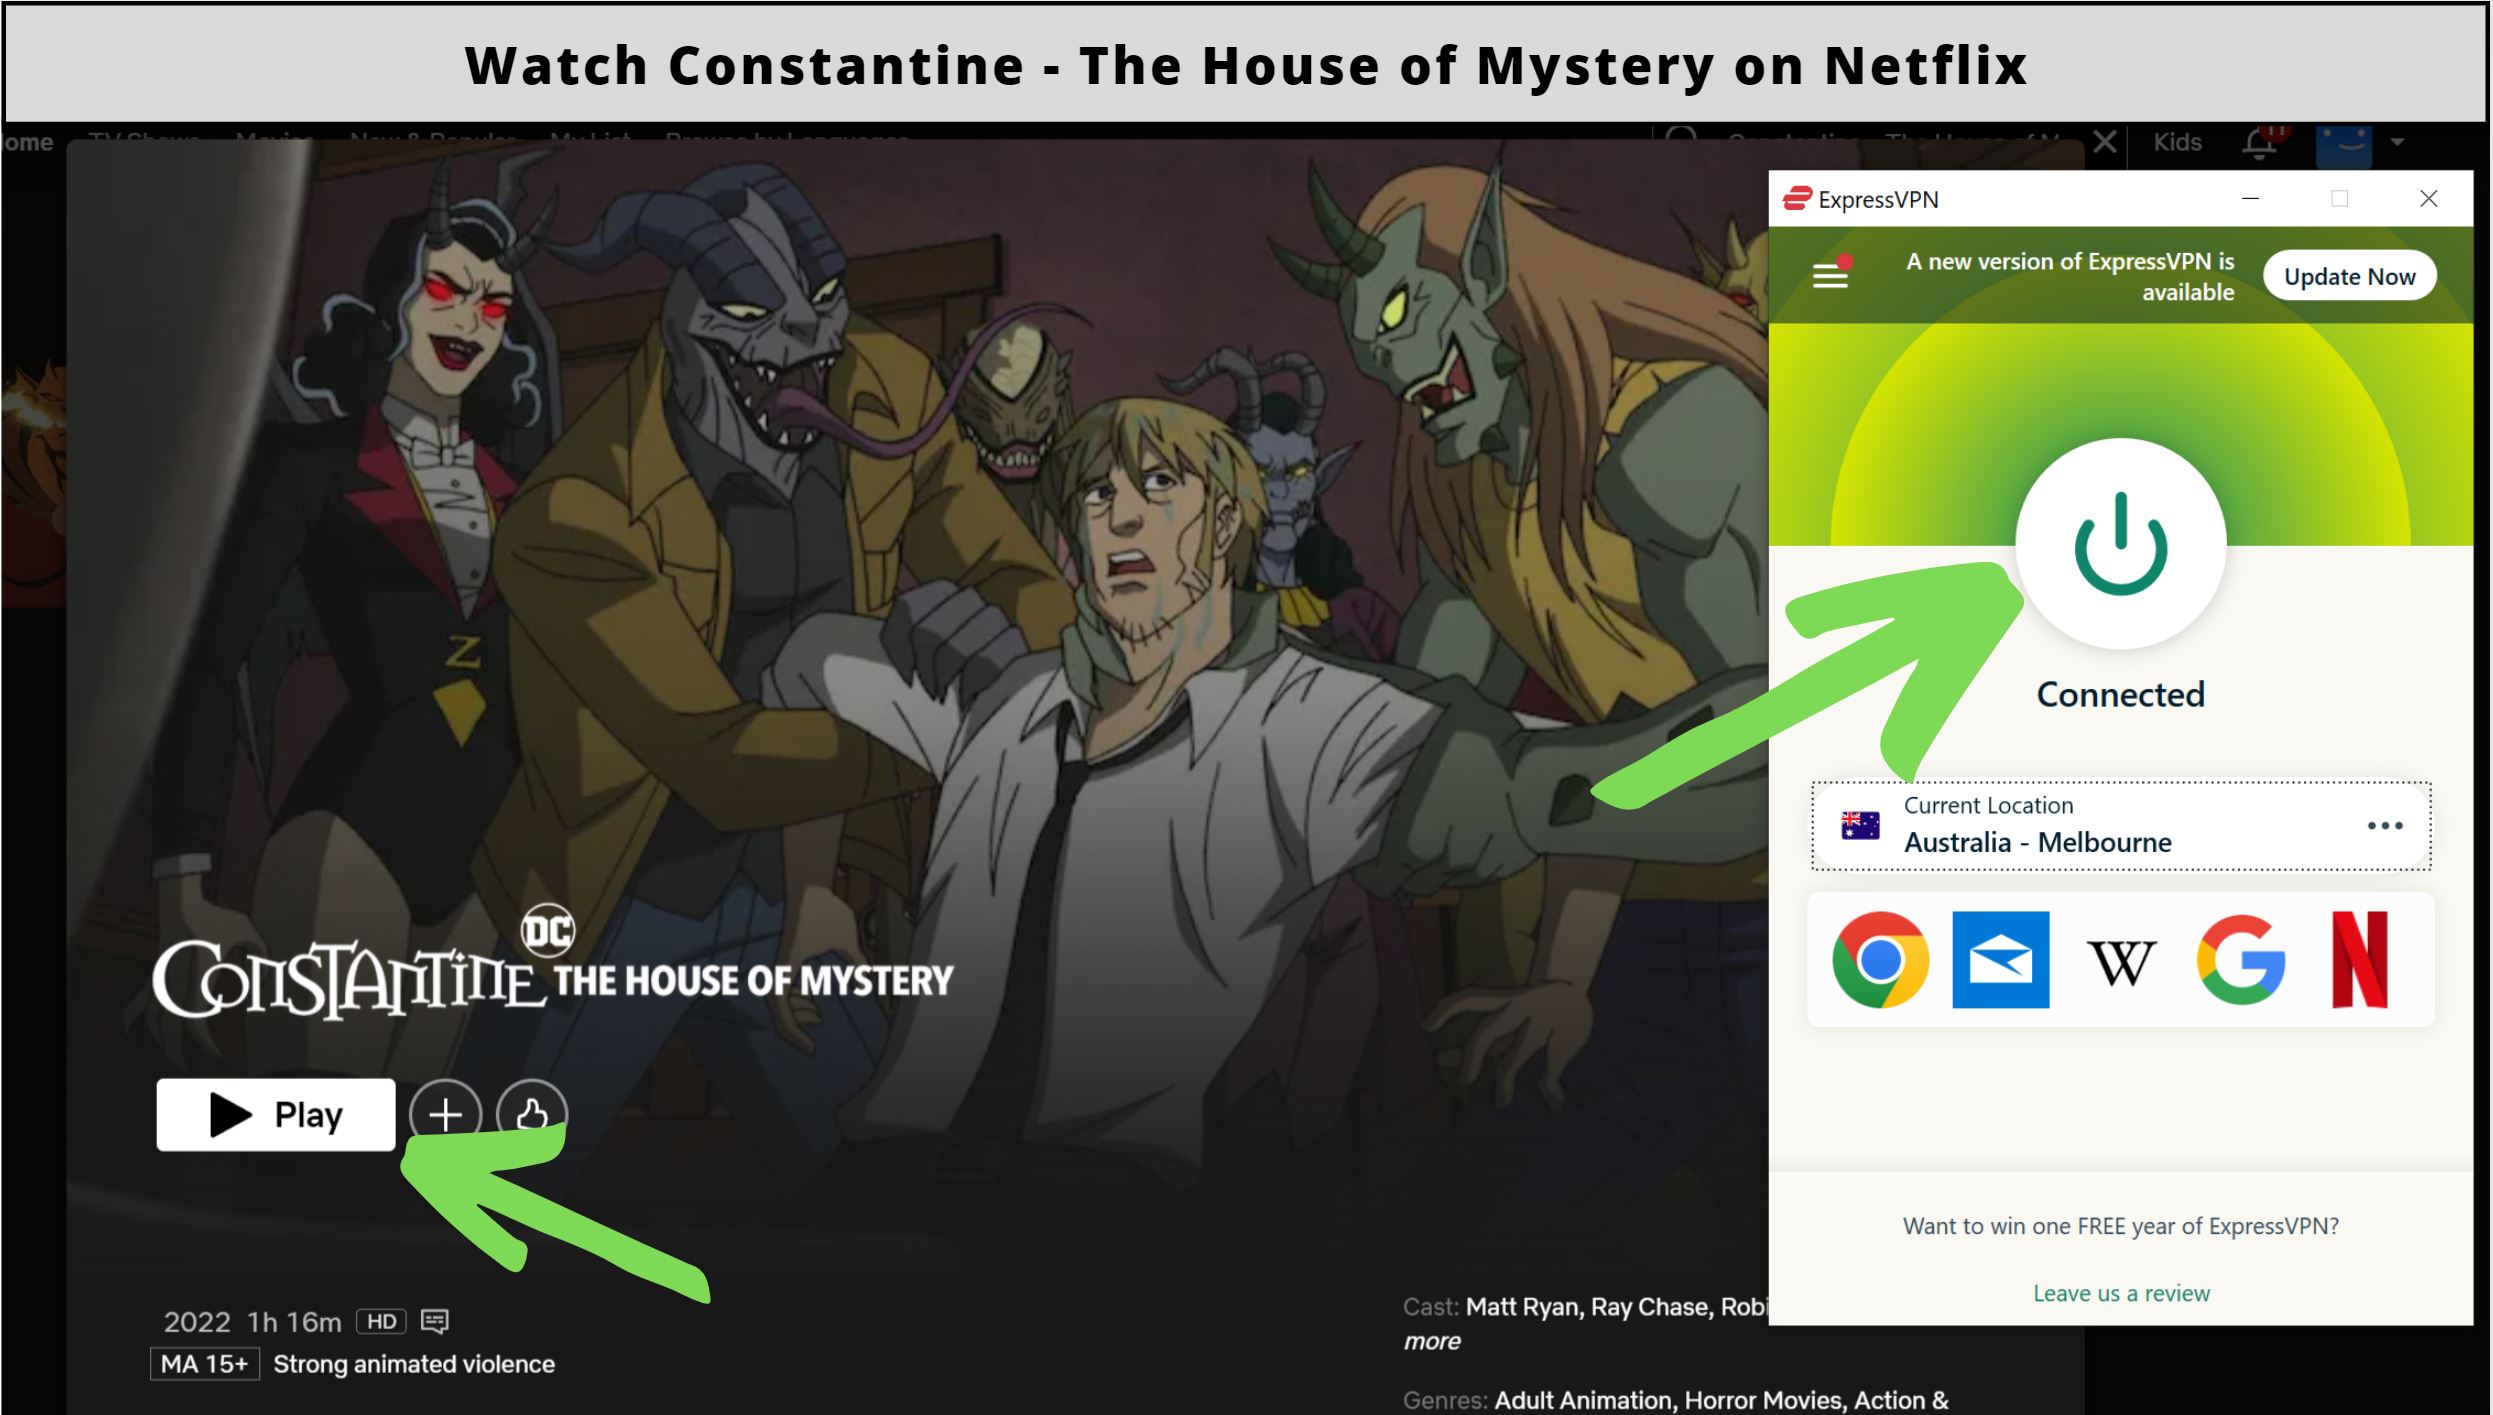 watch Constantine - The House of Mystery on Netflix in 2023?